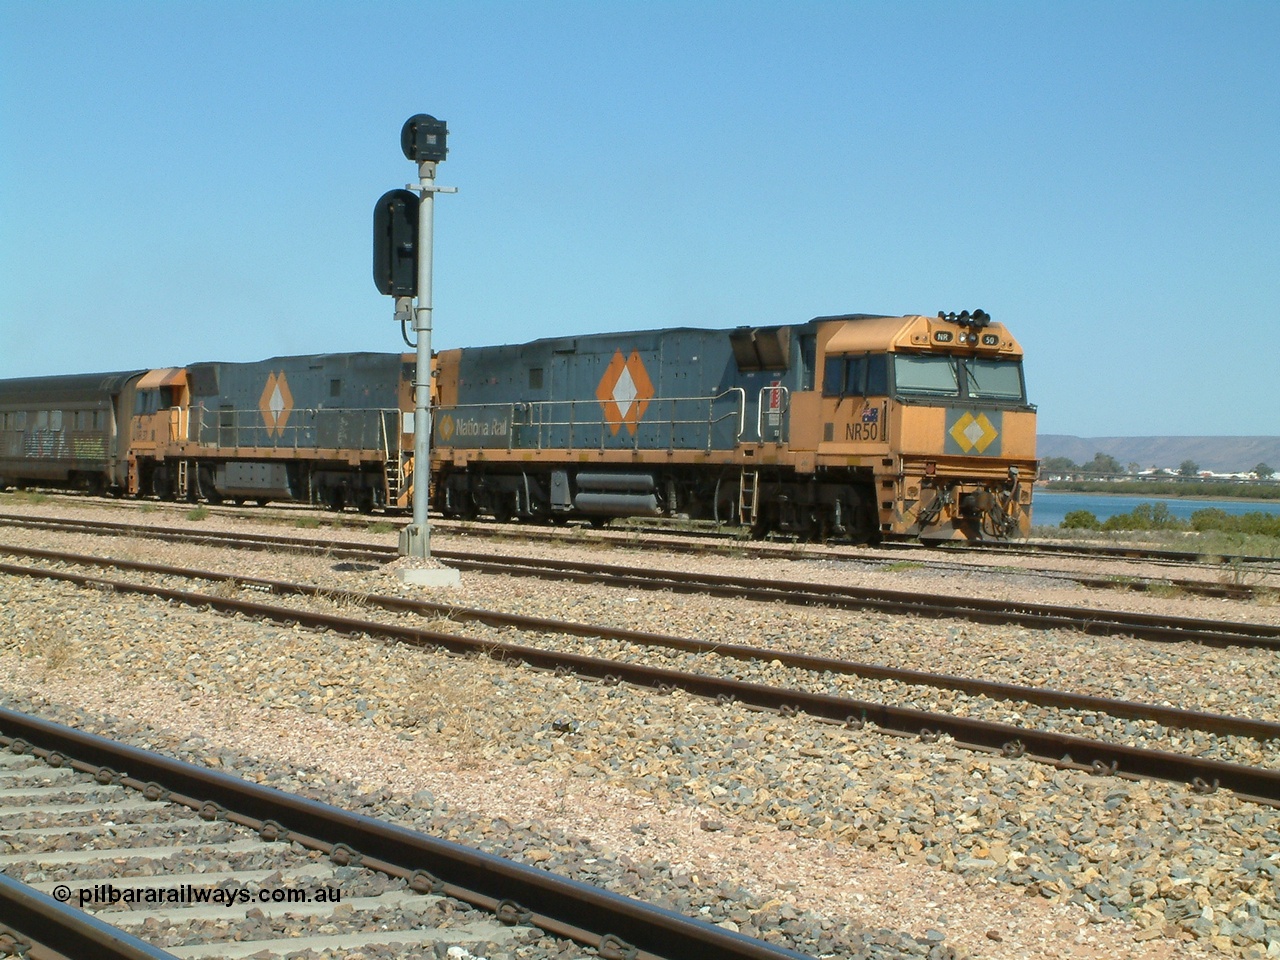 030404 125101
Port Augusta Spencer Junction yard, a Perth bound intermodal awaits departure time on 13 Road behind National Rail NR class units built by Goninan as GE Cv40-9i models, NR 50 serial 7250-08 / 97-252 and NR 37 serial 7250-06 / 97-239. 4th April 2003.
Keywords: NR-class;NR50;7250-08/97-252;Goninan;GE;Cv40-9i;